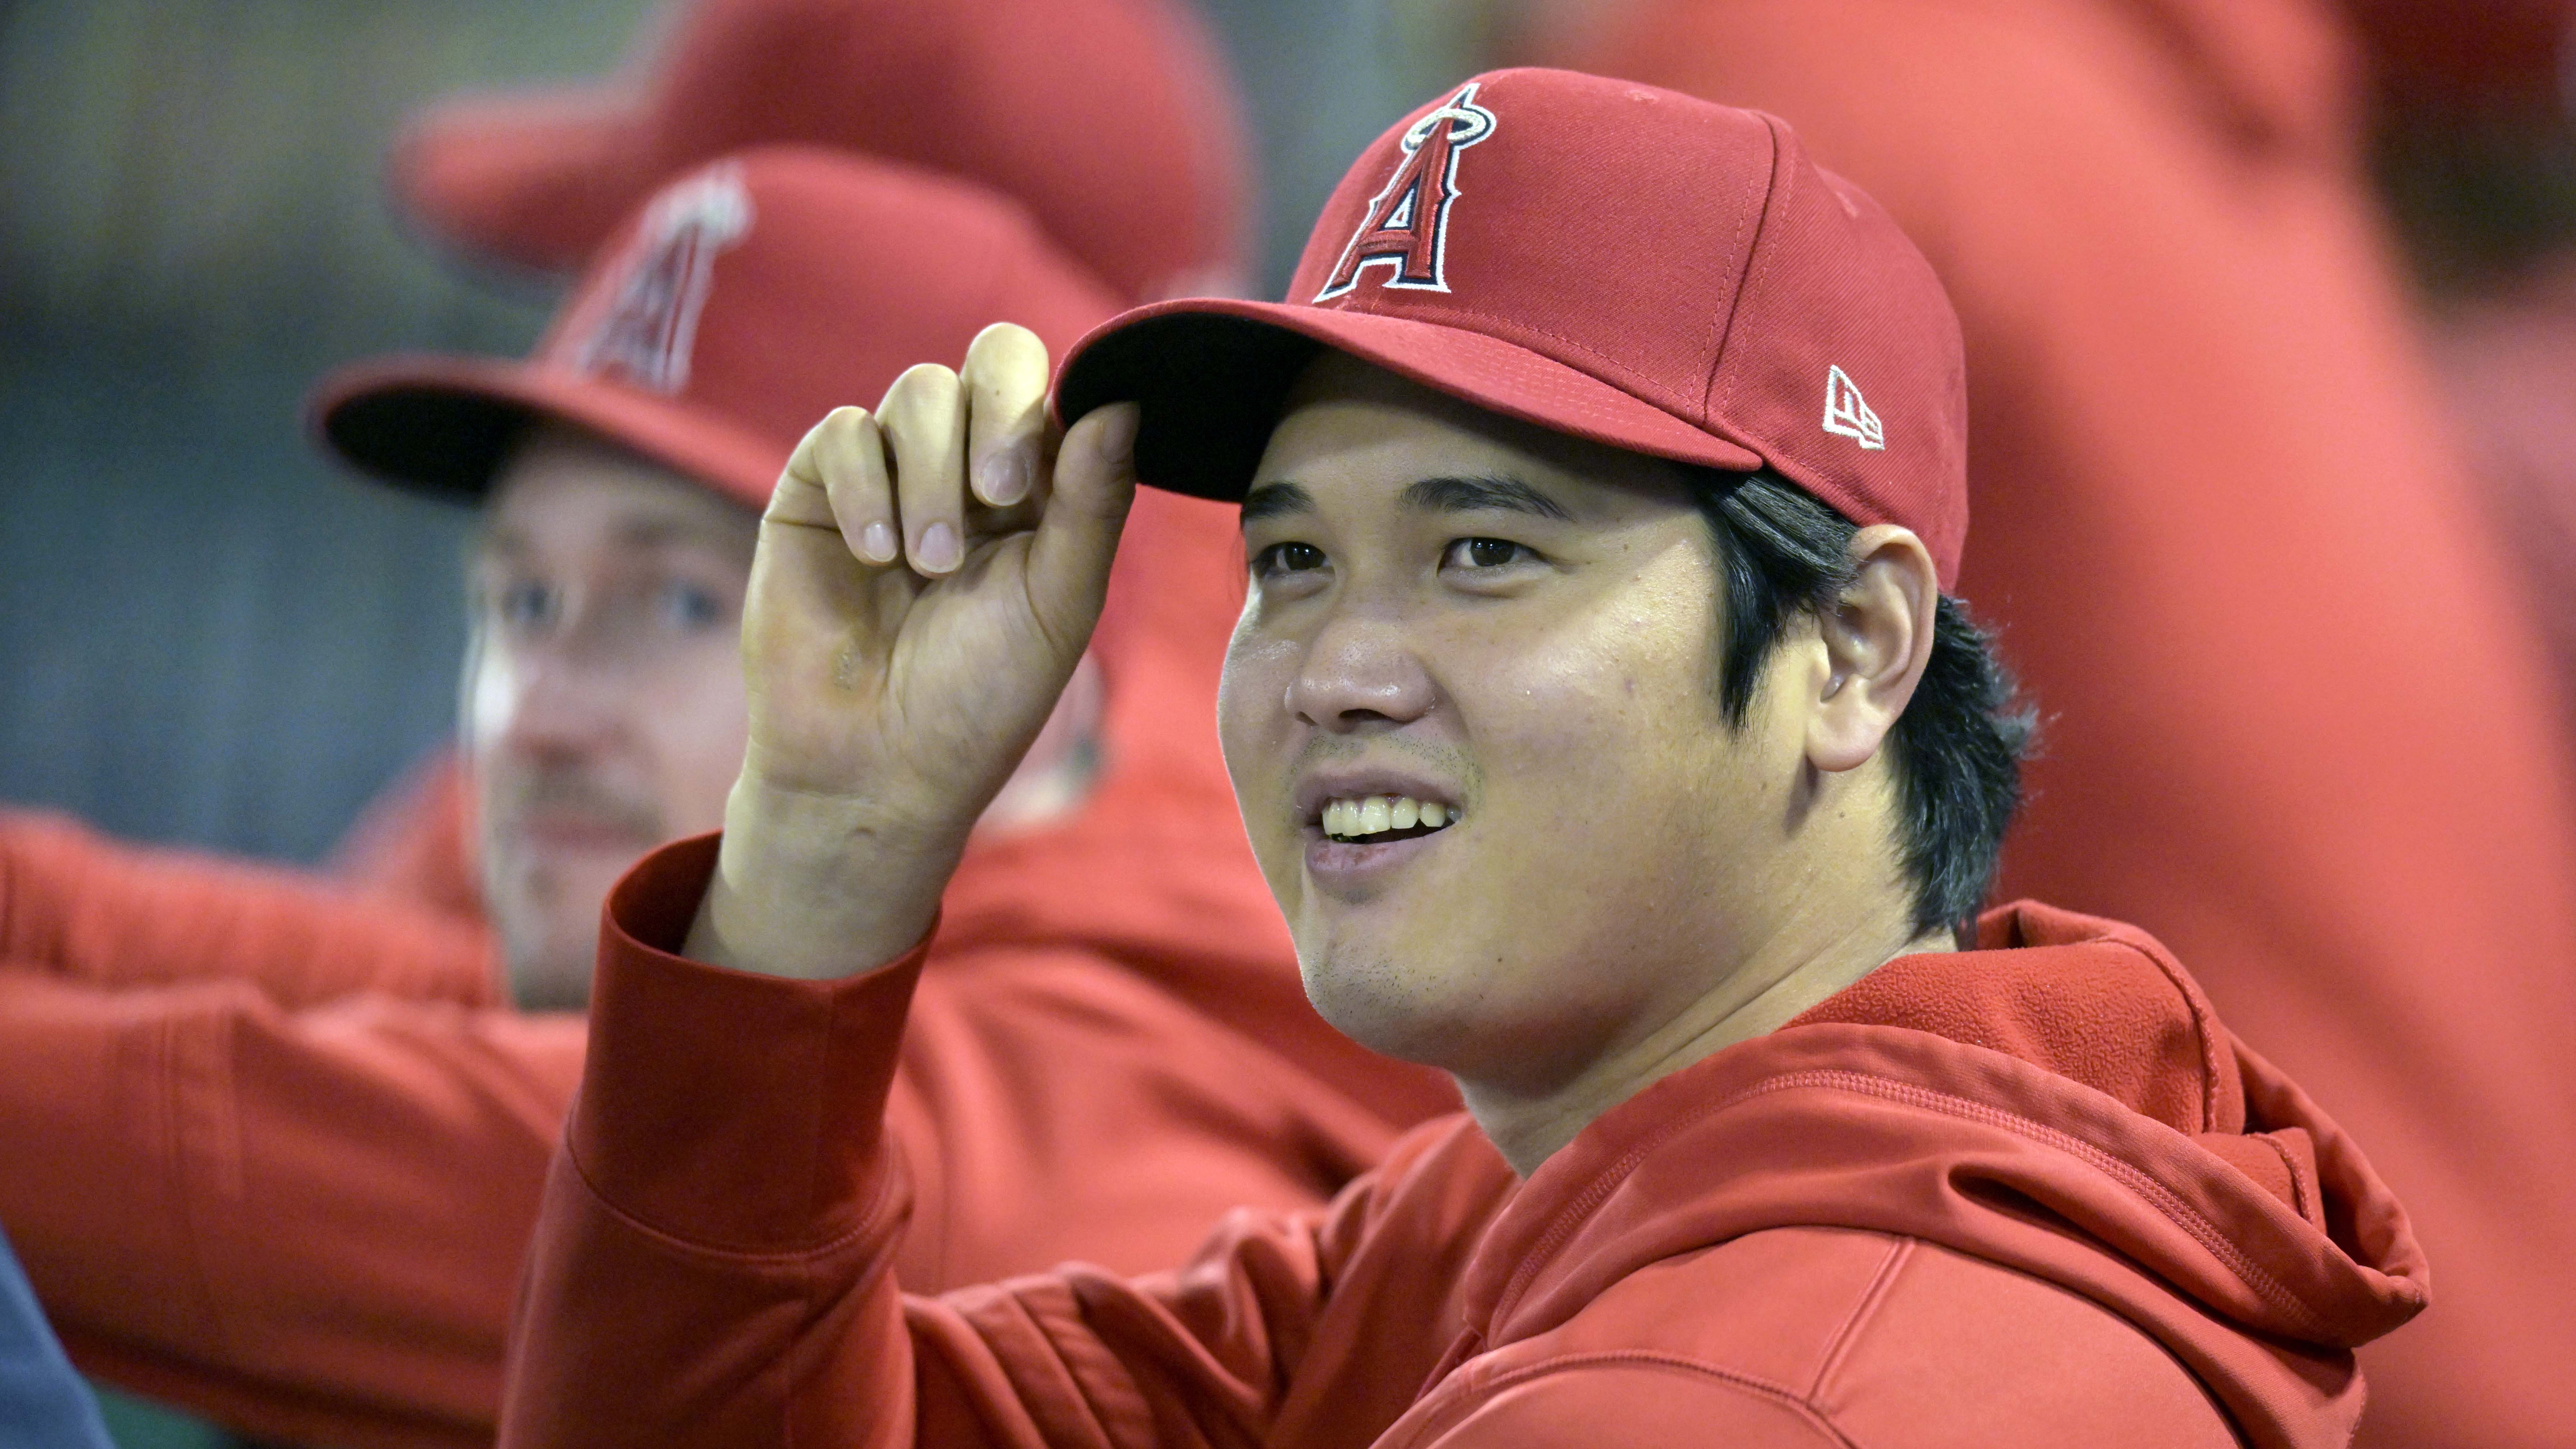 Shohei Ohtani Signs Long-Term Deal With New Balance - Sports